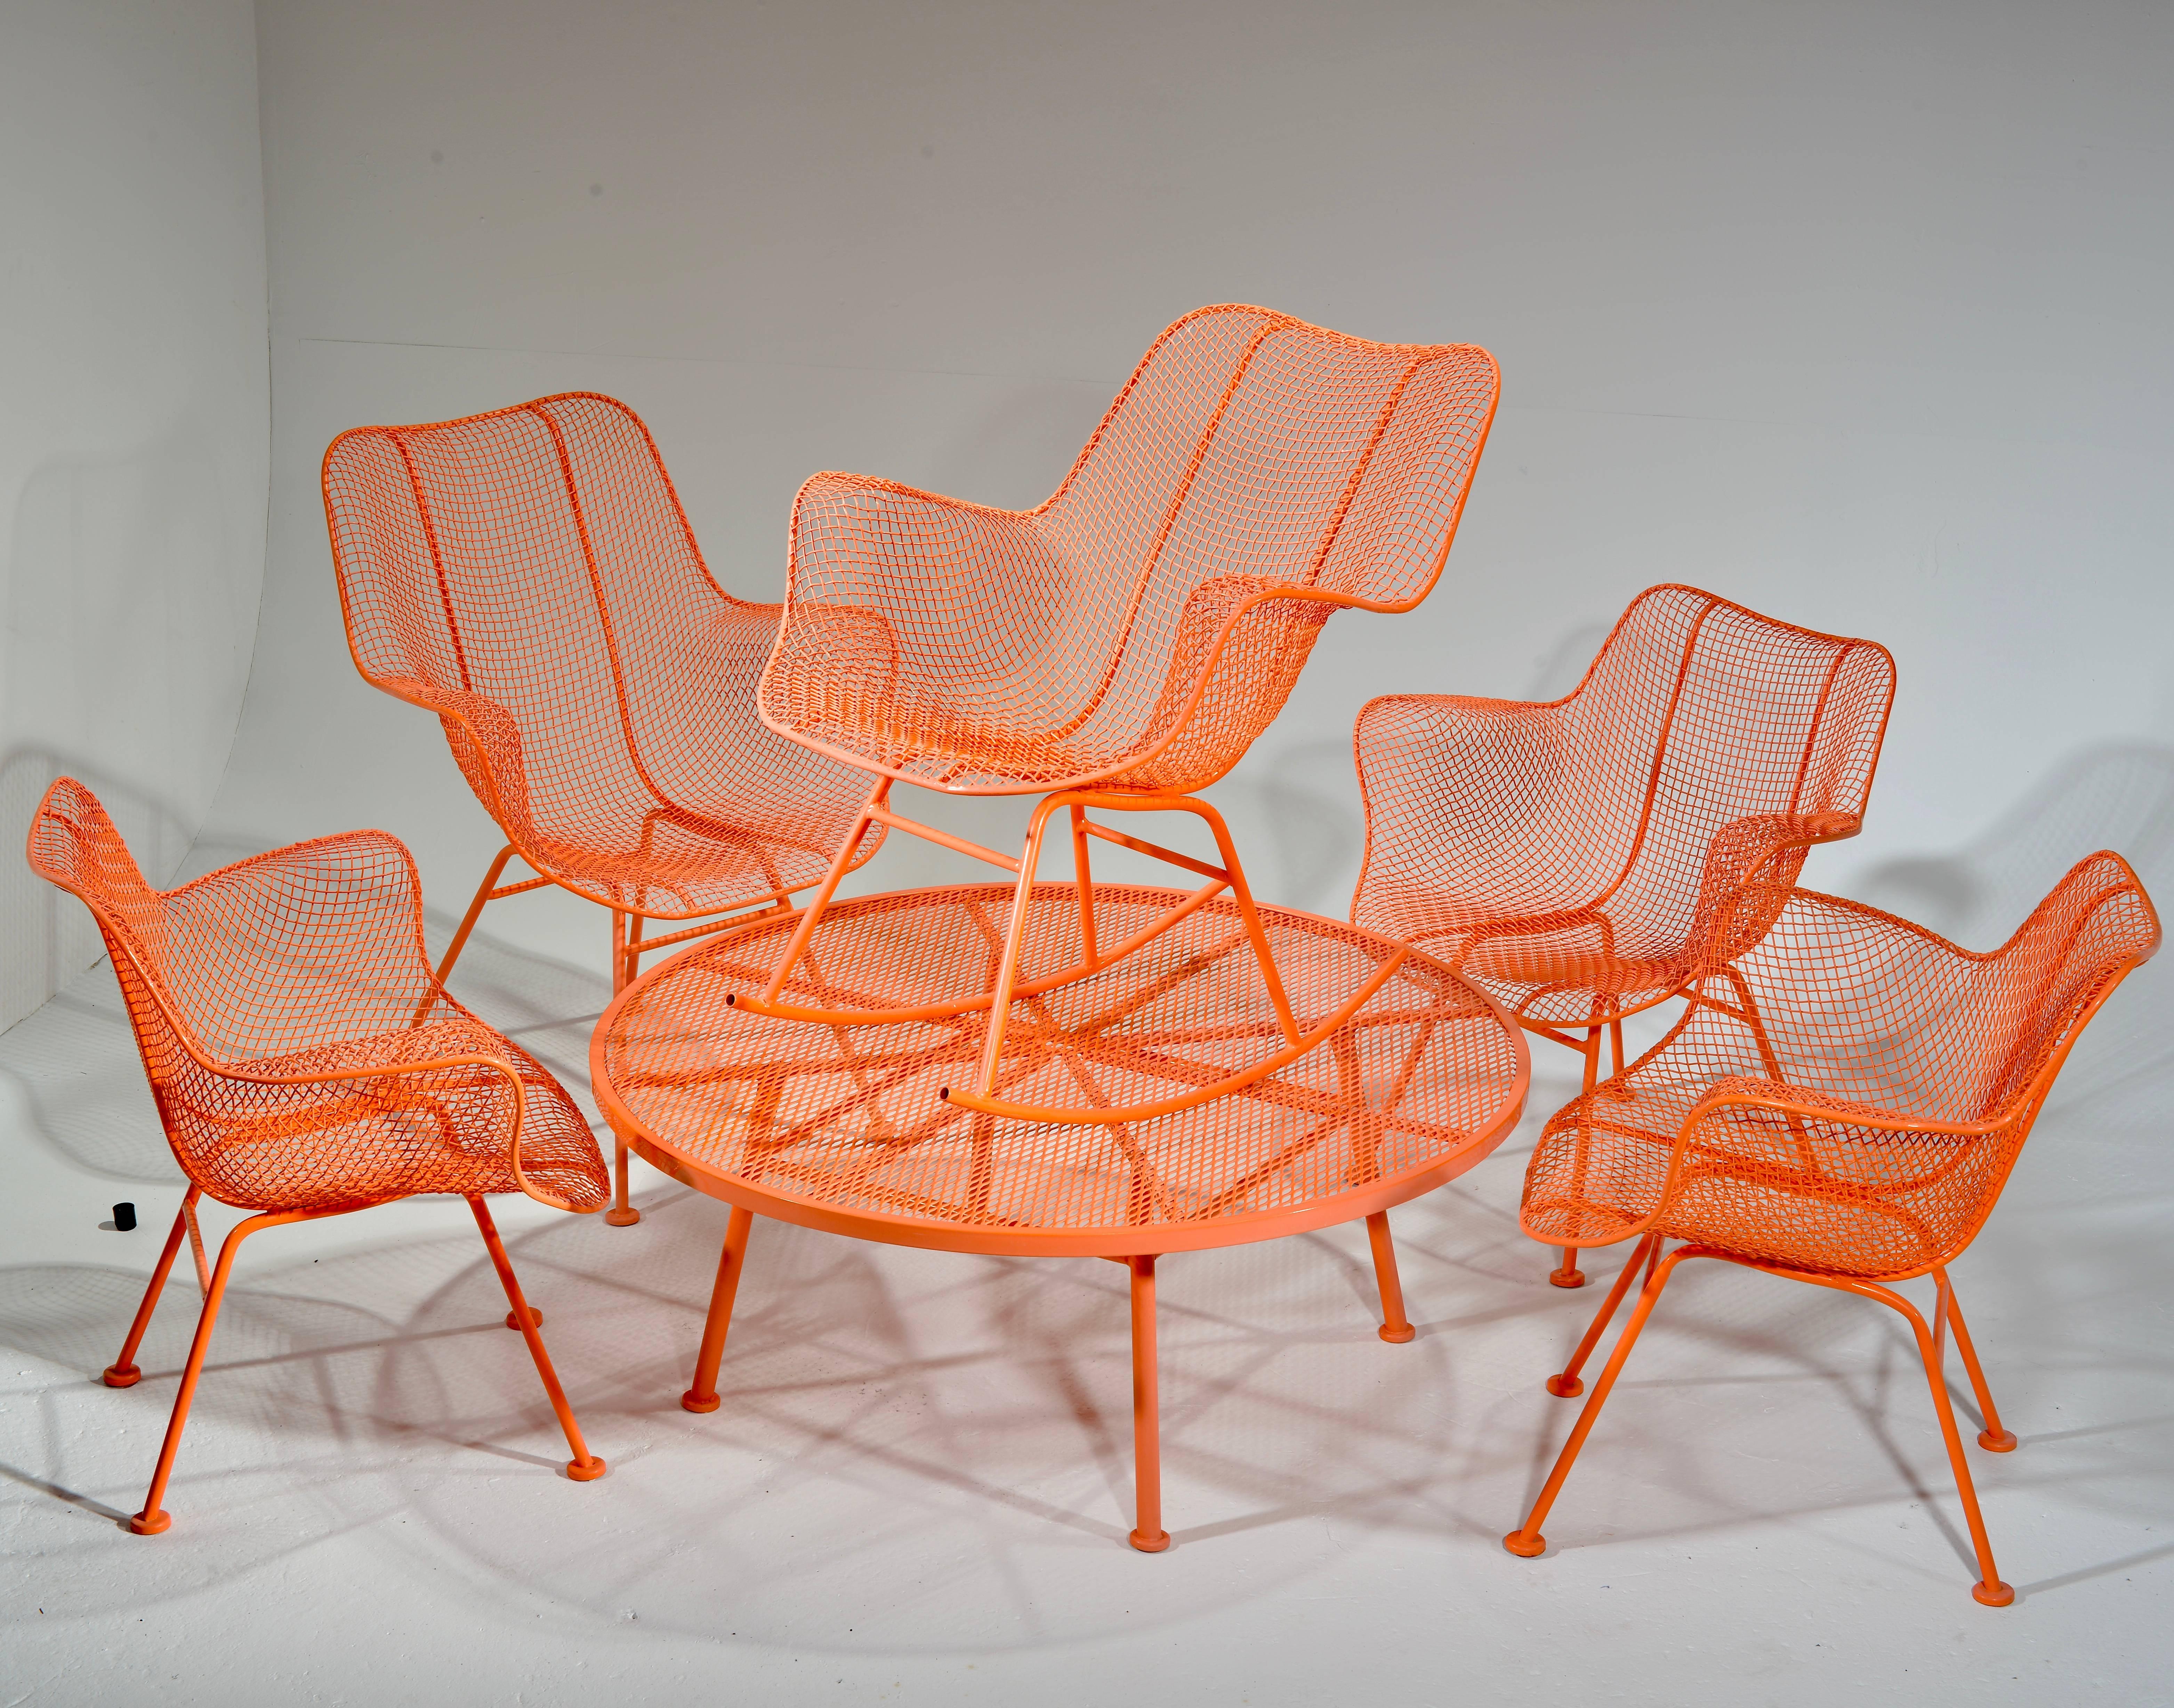 A unique set of six 1950s wrought iron chairs and table from Russell Woodard's Sculptura collection. Includes one round coffee table, three armed lounge chairs, one armed side chair, and one rocking chair. This set has been powder coated in salmon